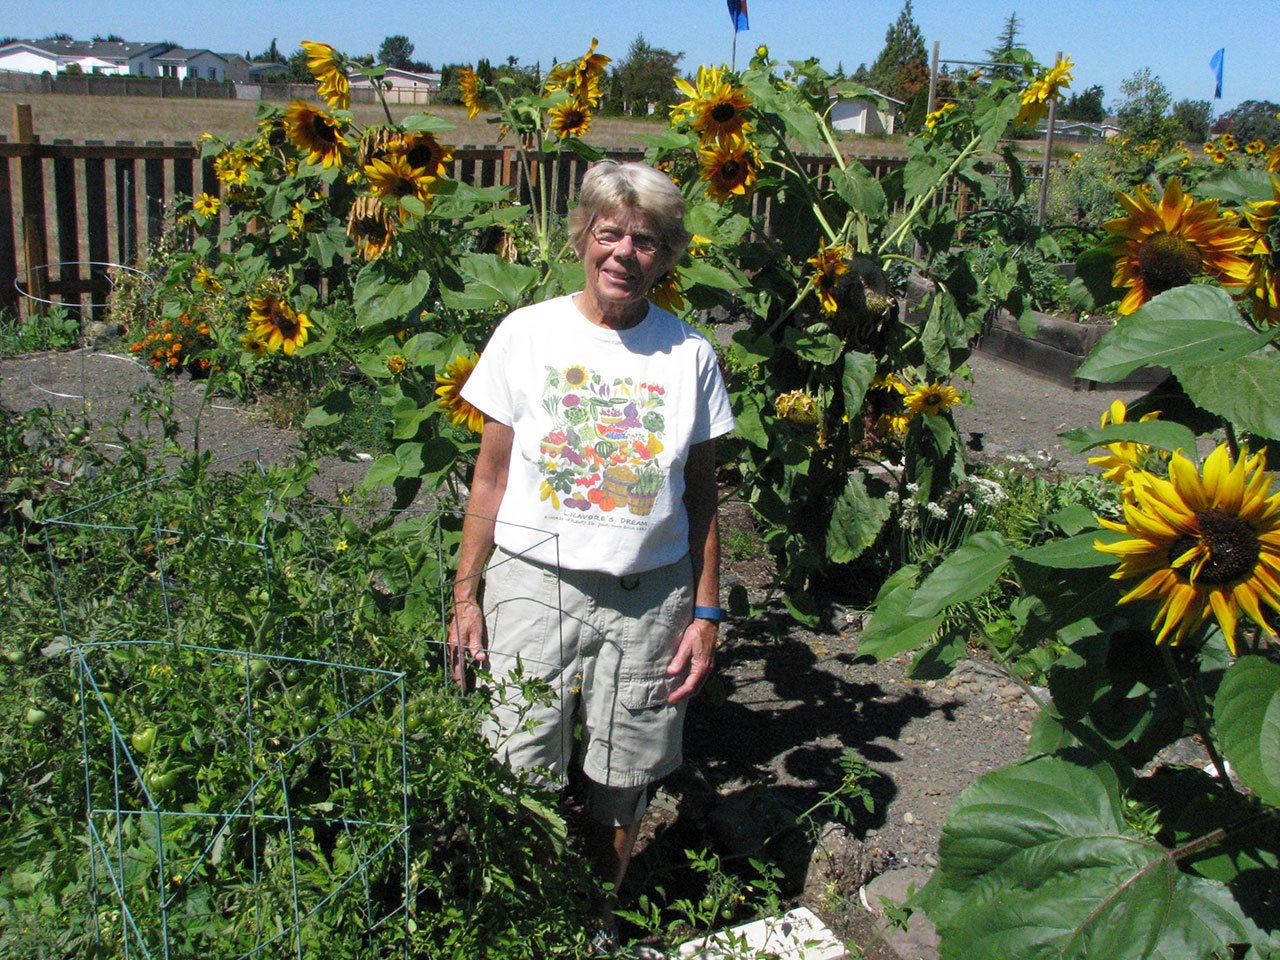 “The Volatile Language of Plants” will be presented by Pam Larsen on Sept. 8. (Clallam County Master Gardeners)